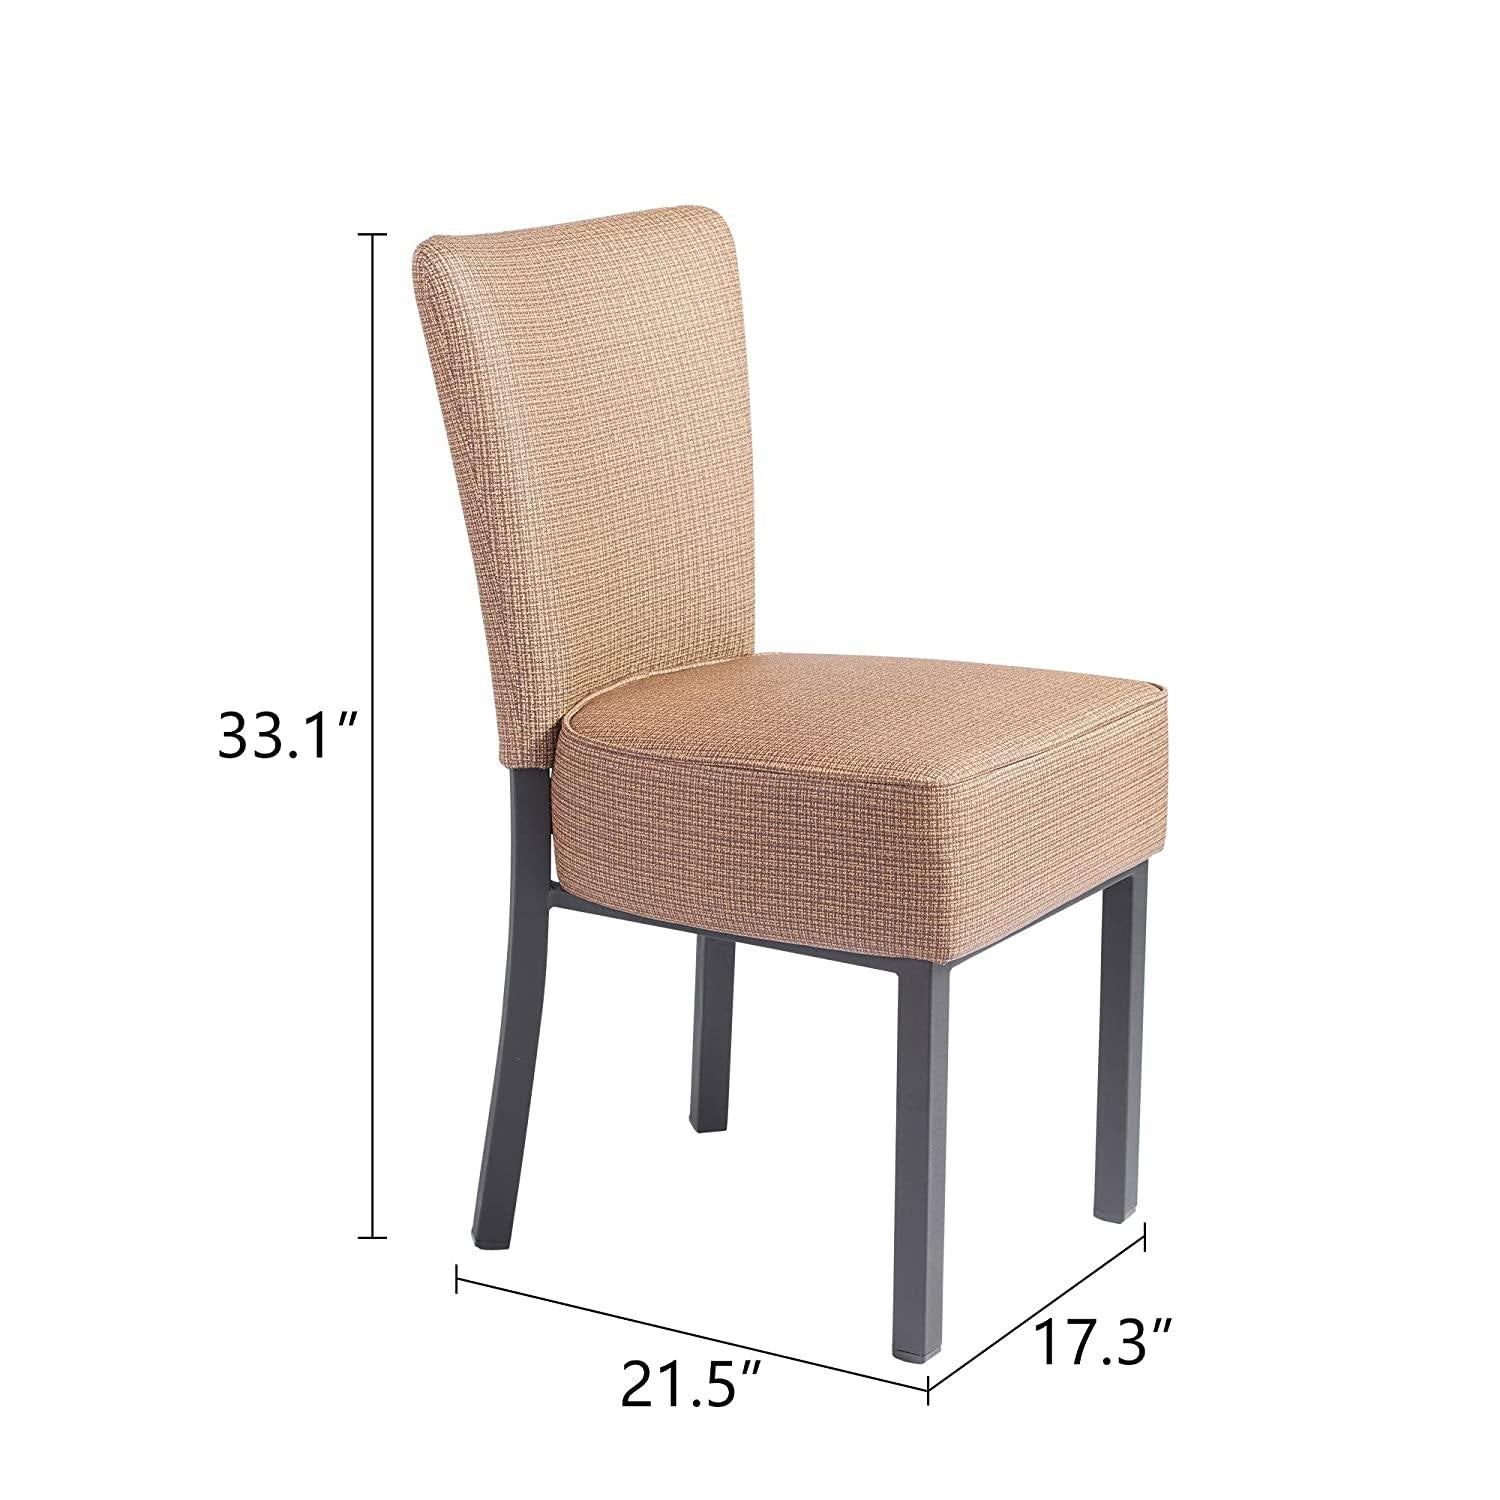 Upholstered Dining Chairs,Kitchen PU Leather Padded Chair, Modern Dining Room Furniture, Set of 2(Brown) - Bosonshop